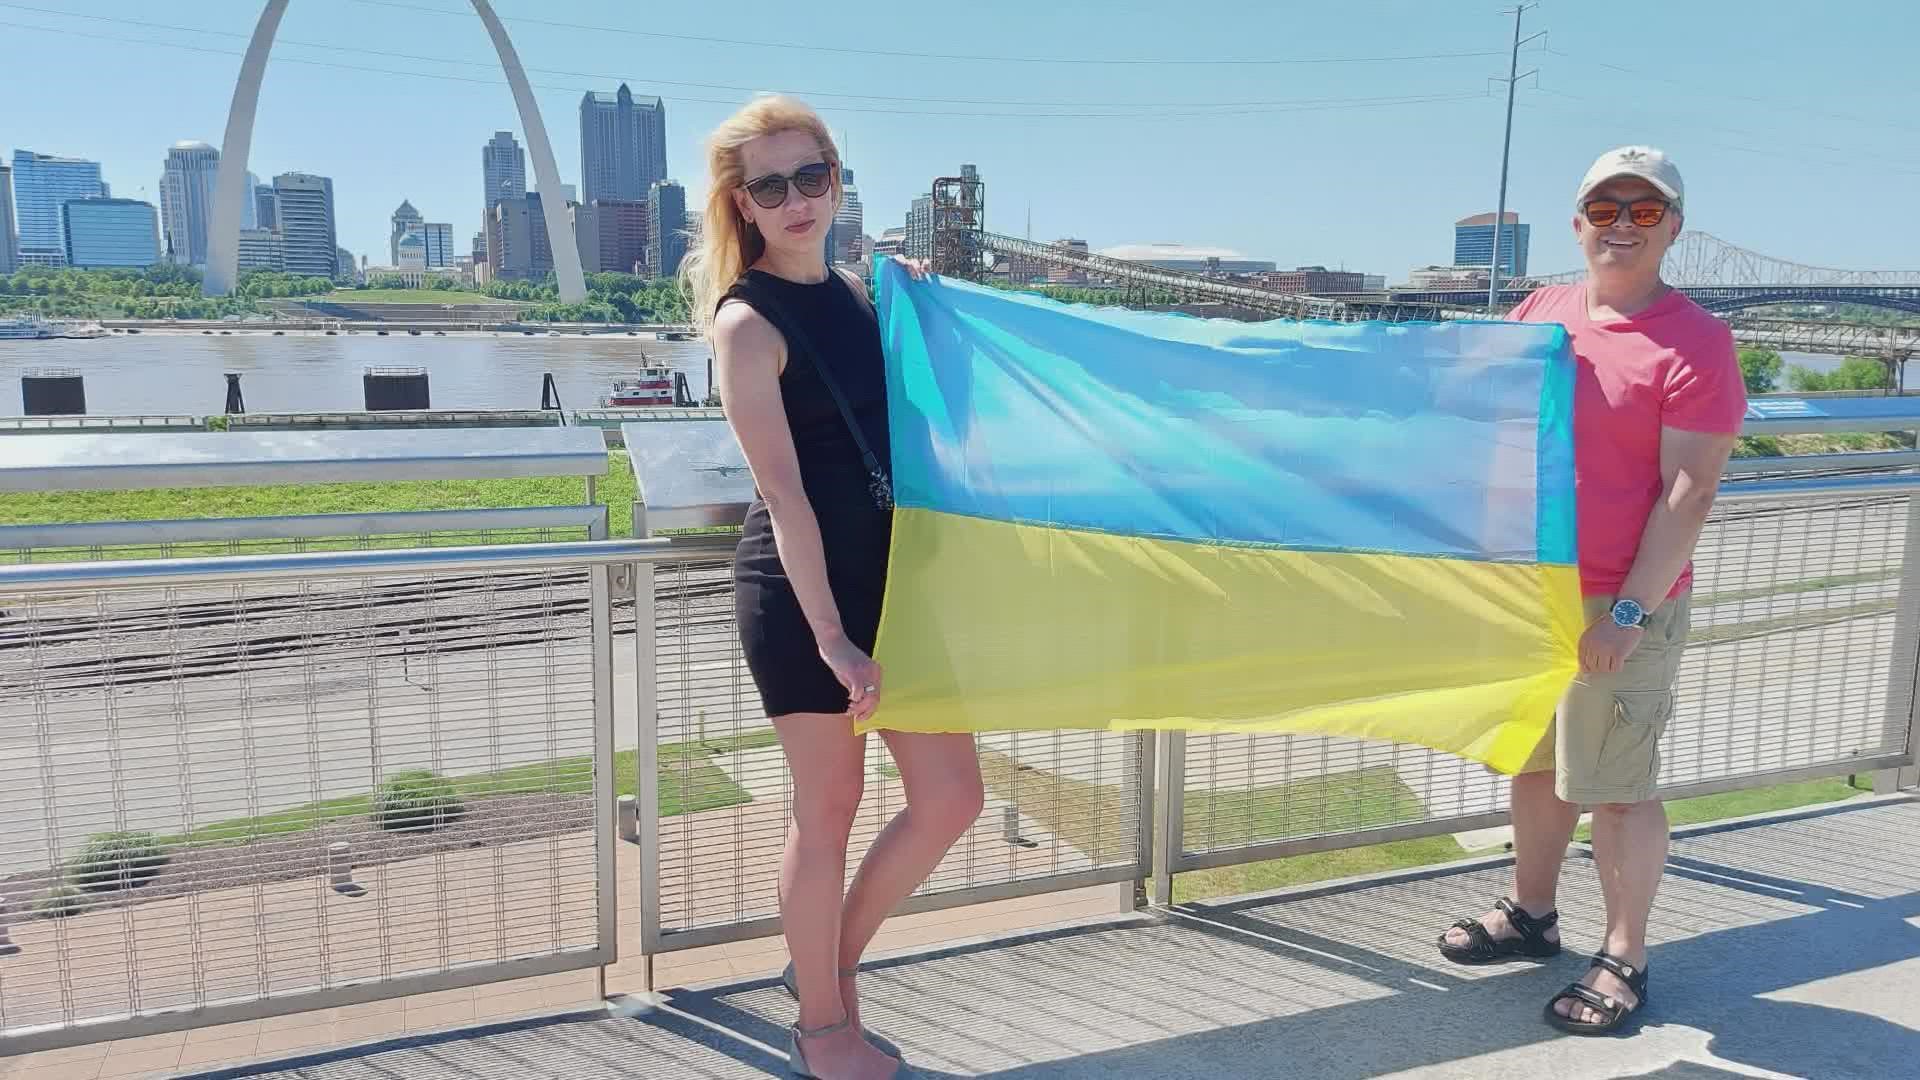 Julia Alekseyeva and her husband Andriy fled Ukraine because of the war. The organization Welcome Neighbor STL is helping them settle in St. Louis.